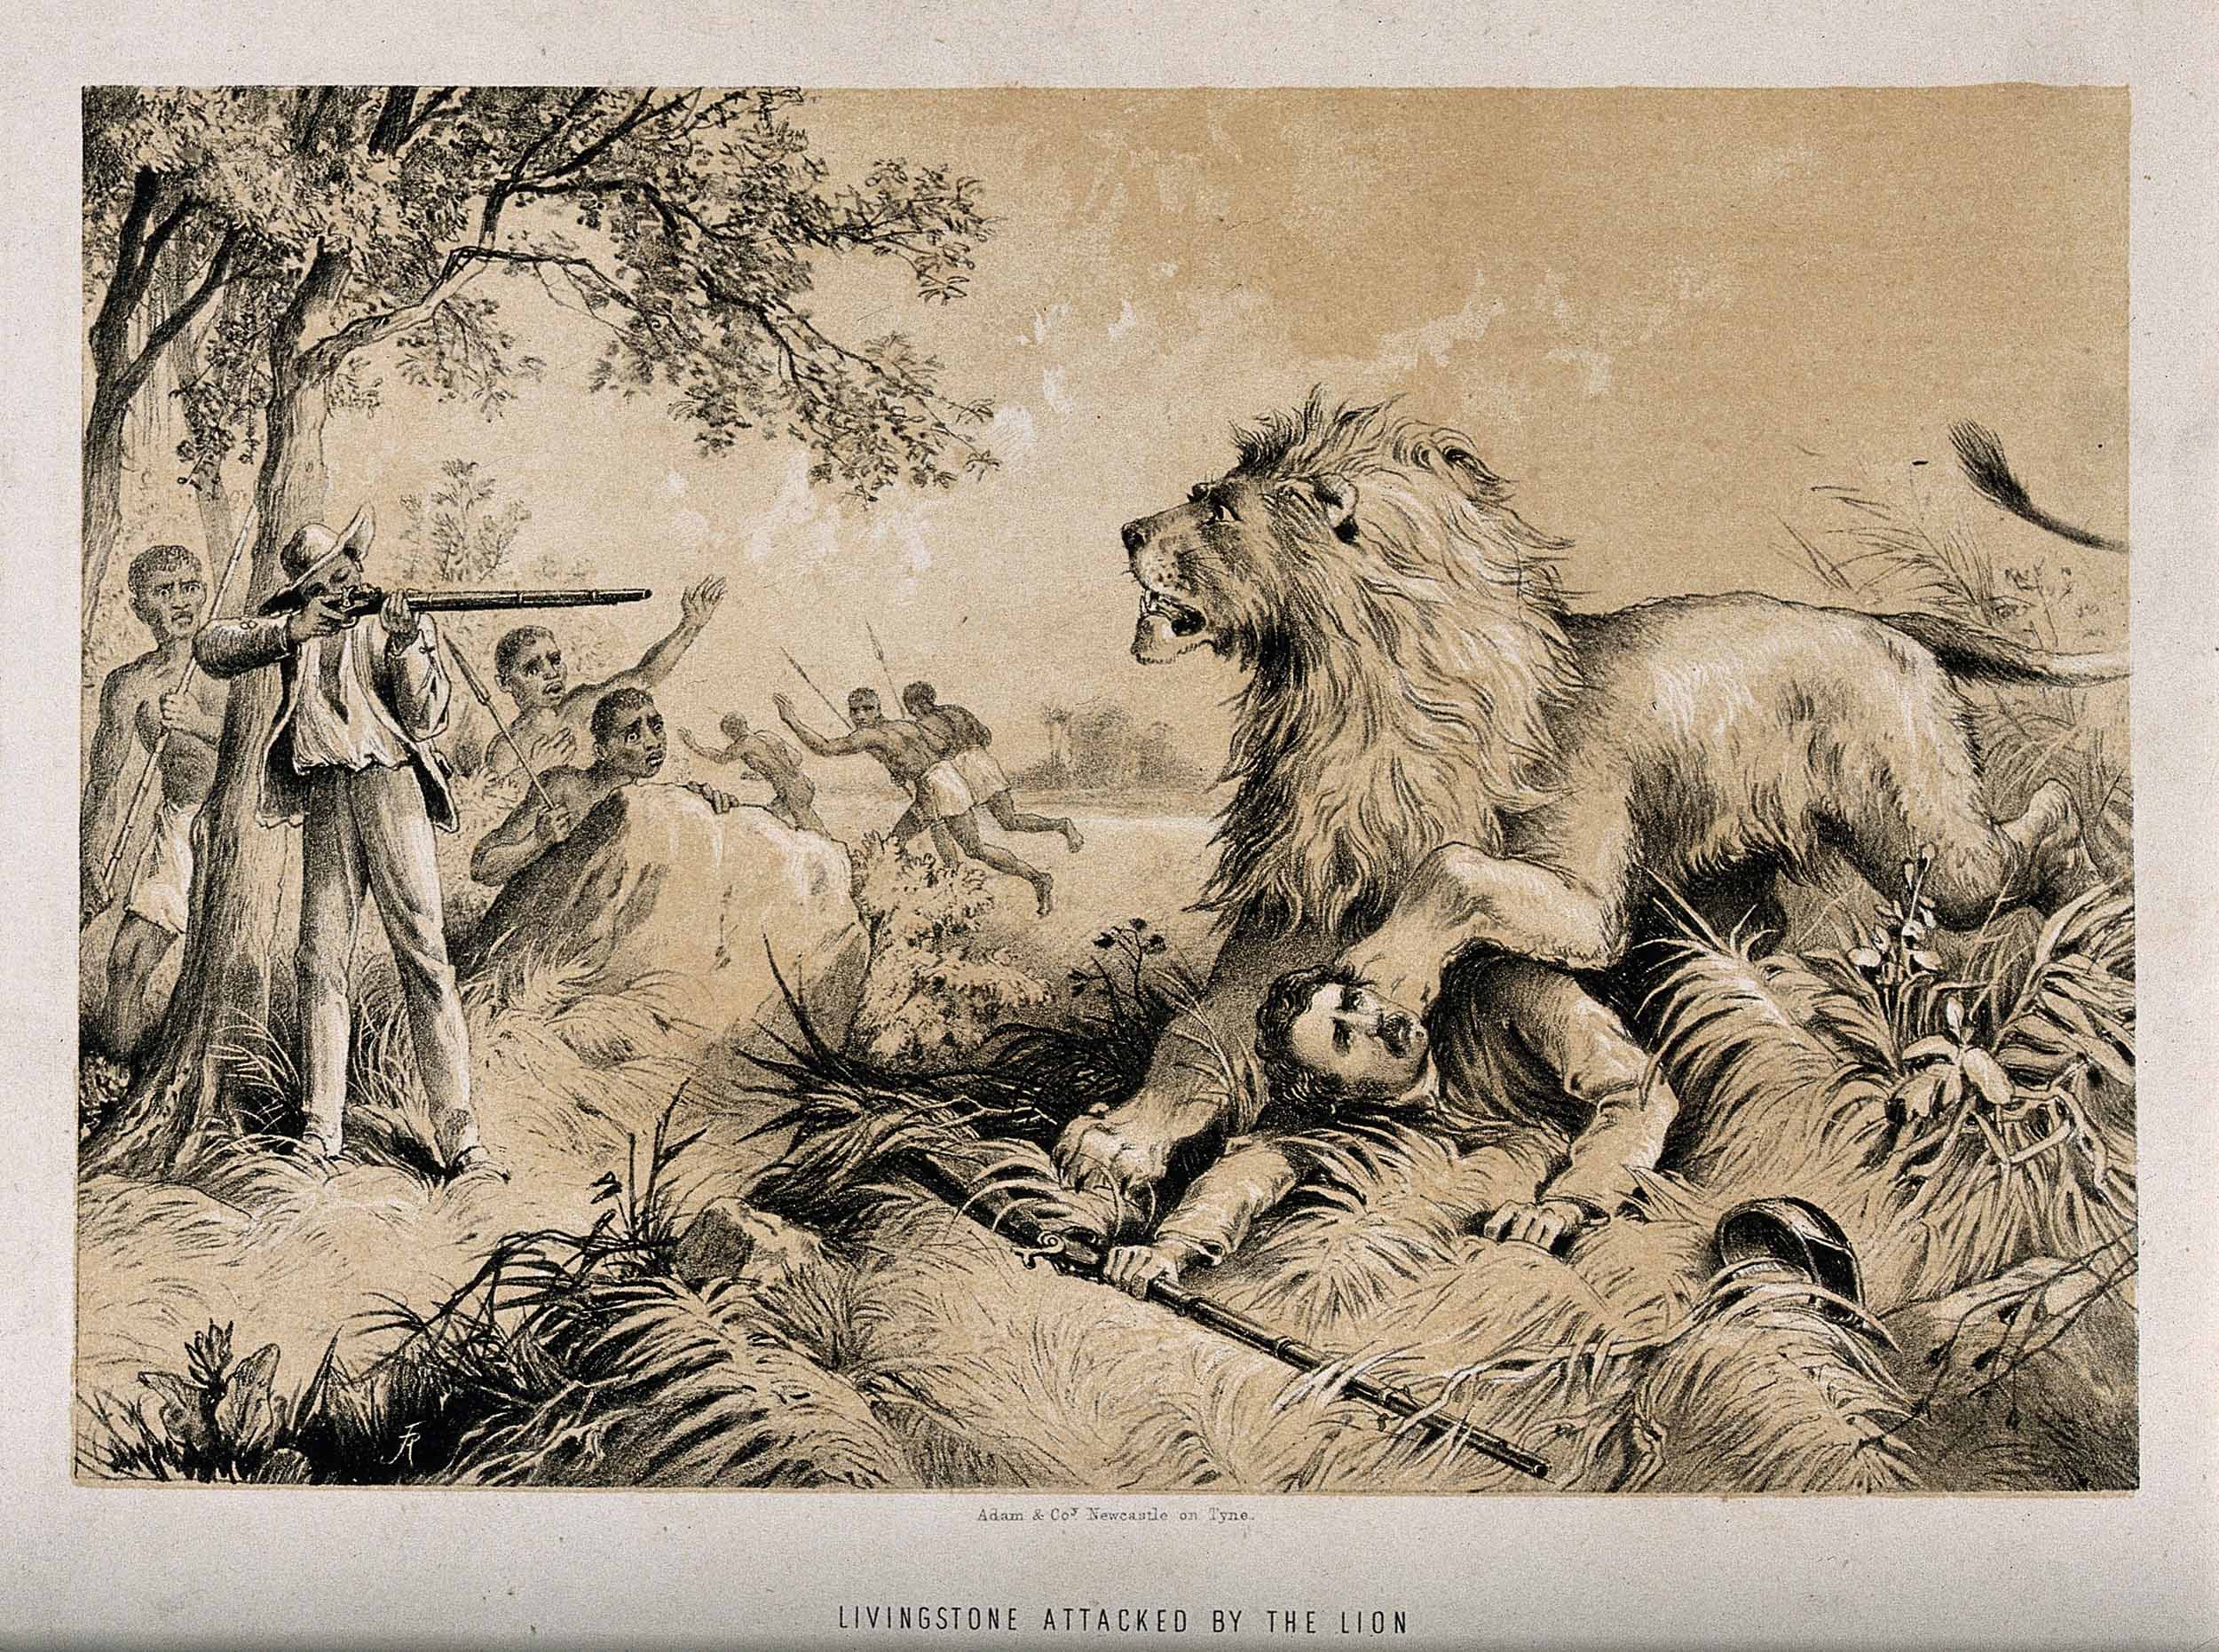 Livingstone attacked by the lion. Copyright Wellcome Library, London. Creative Commons Attribution 4.0 International (https://creativecommons.org/licenses/by/4.0/).